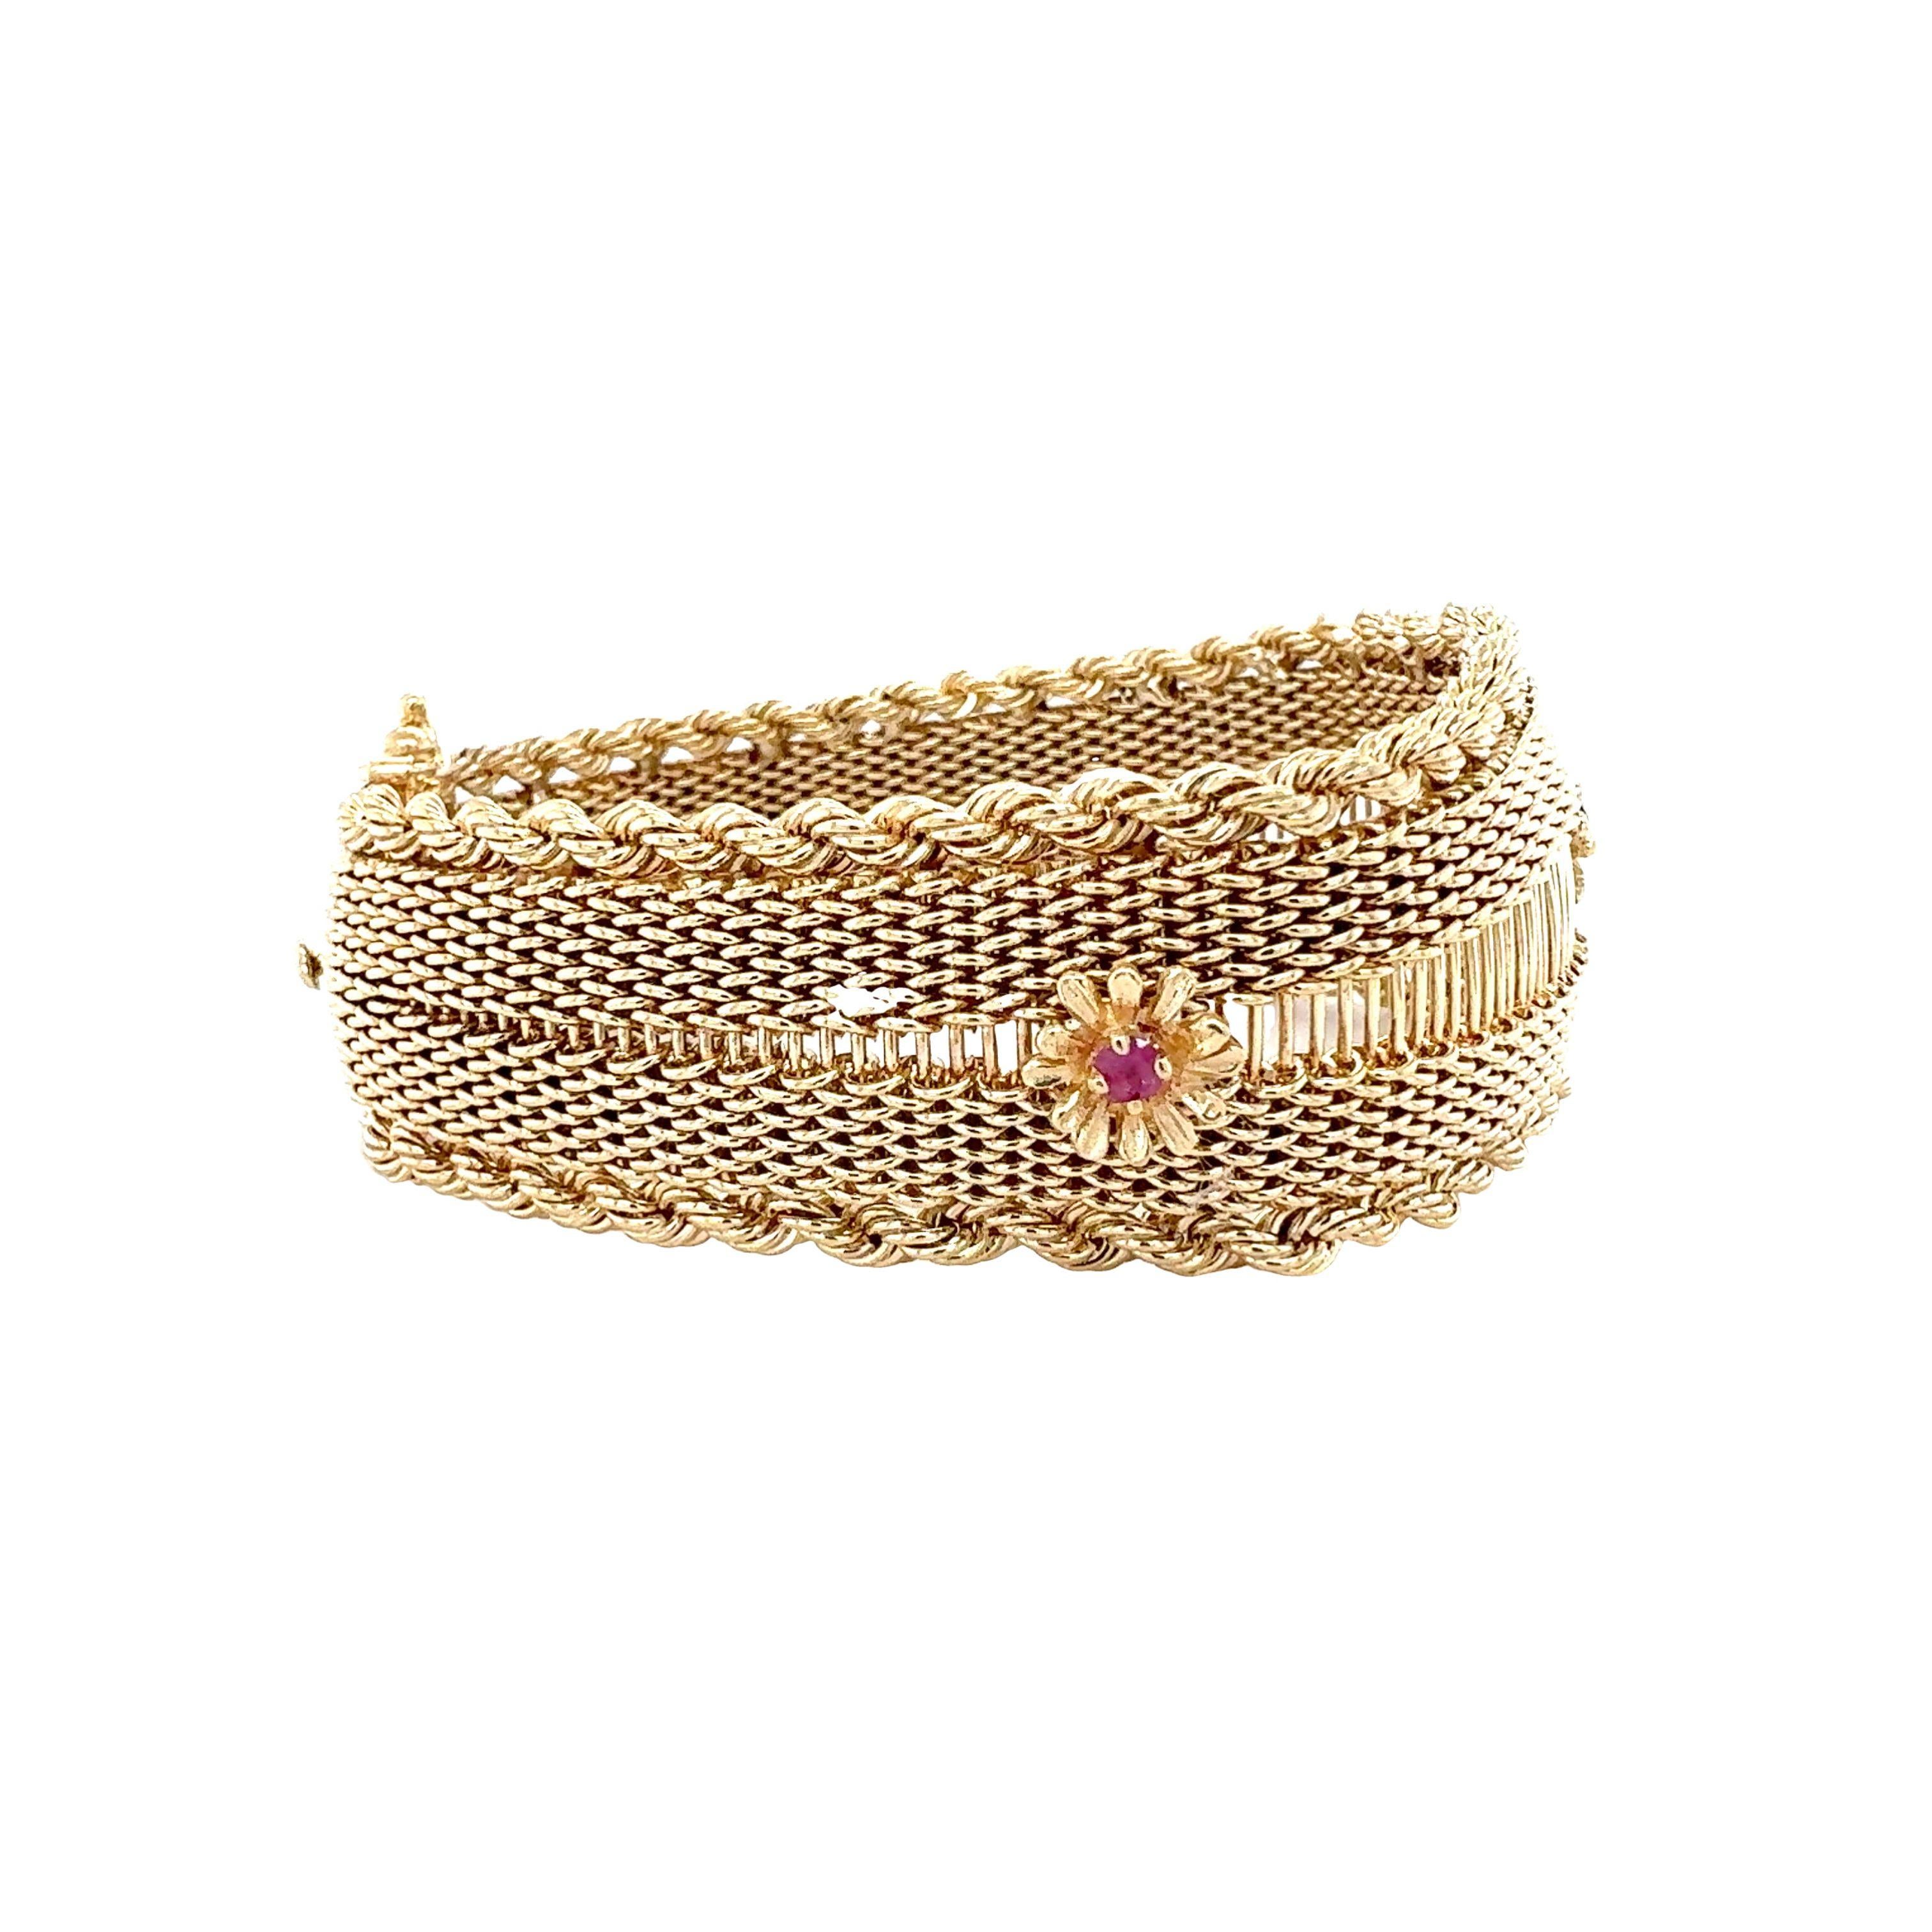 One 14K yellow gold garnet bracelet featuring mesh link design with rope twist gold border and centering three rhodolite garnets weighing 0.24 ct. in total. Measures 26 millimeters wide at center tapering to 17 millimeters at clasp.

Metal: 14K